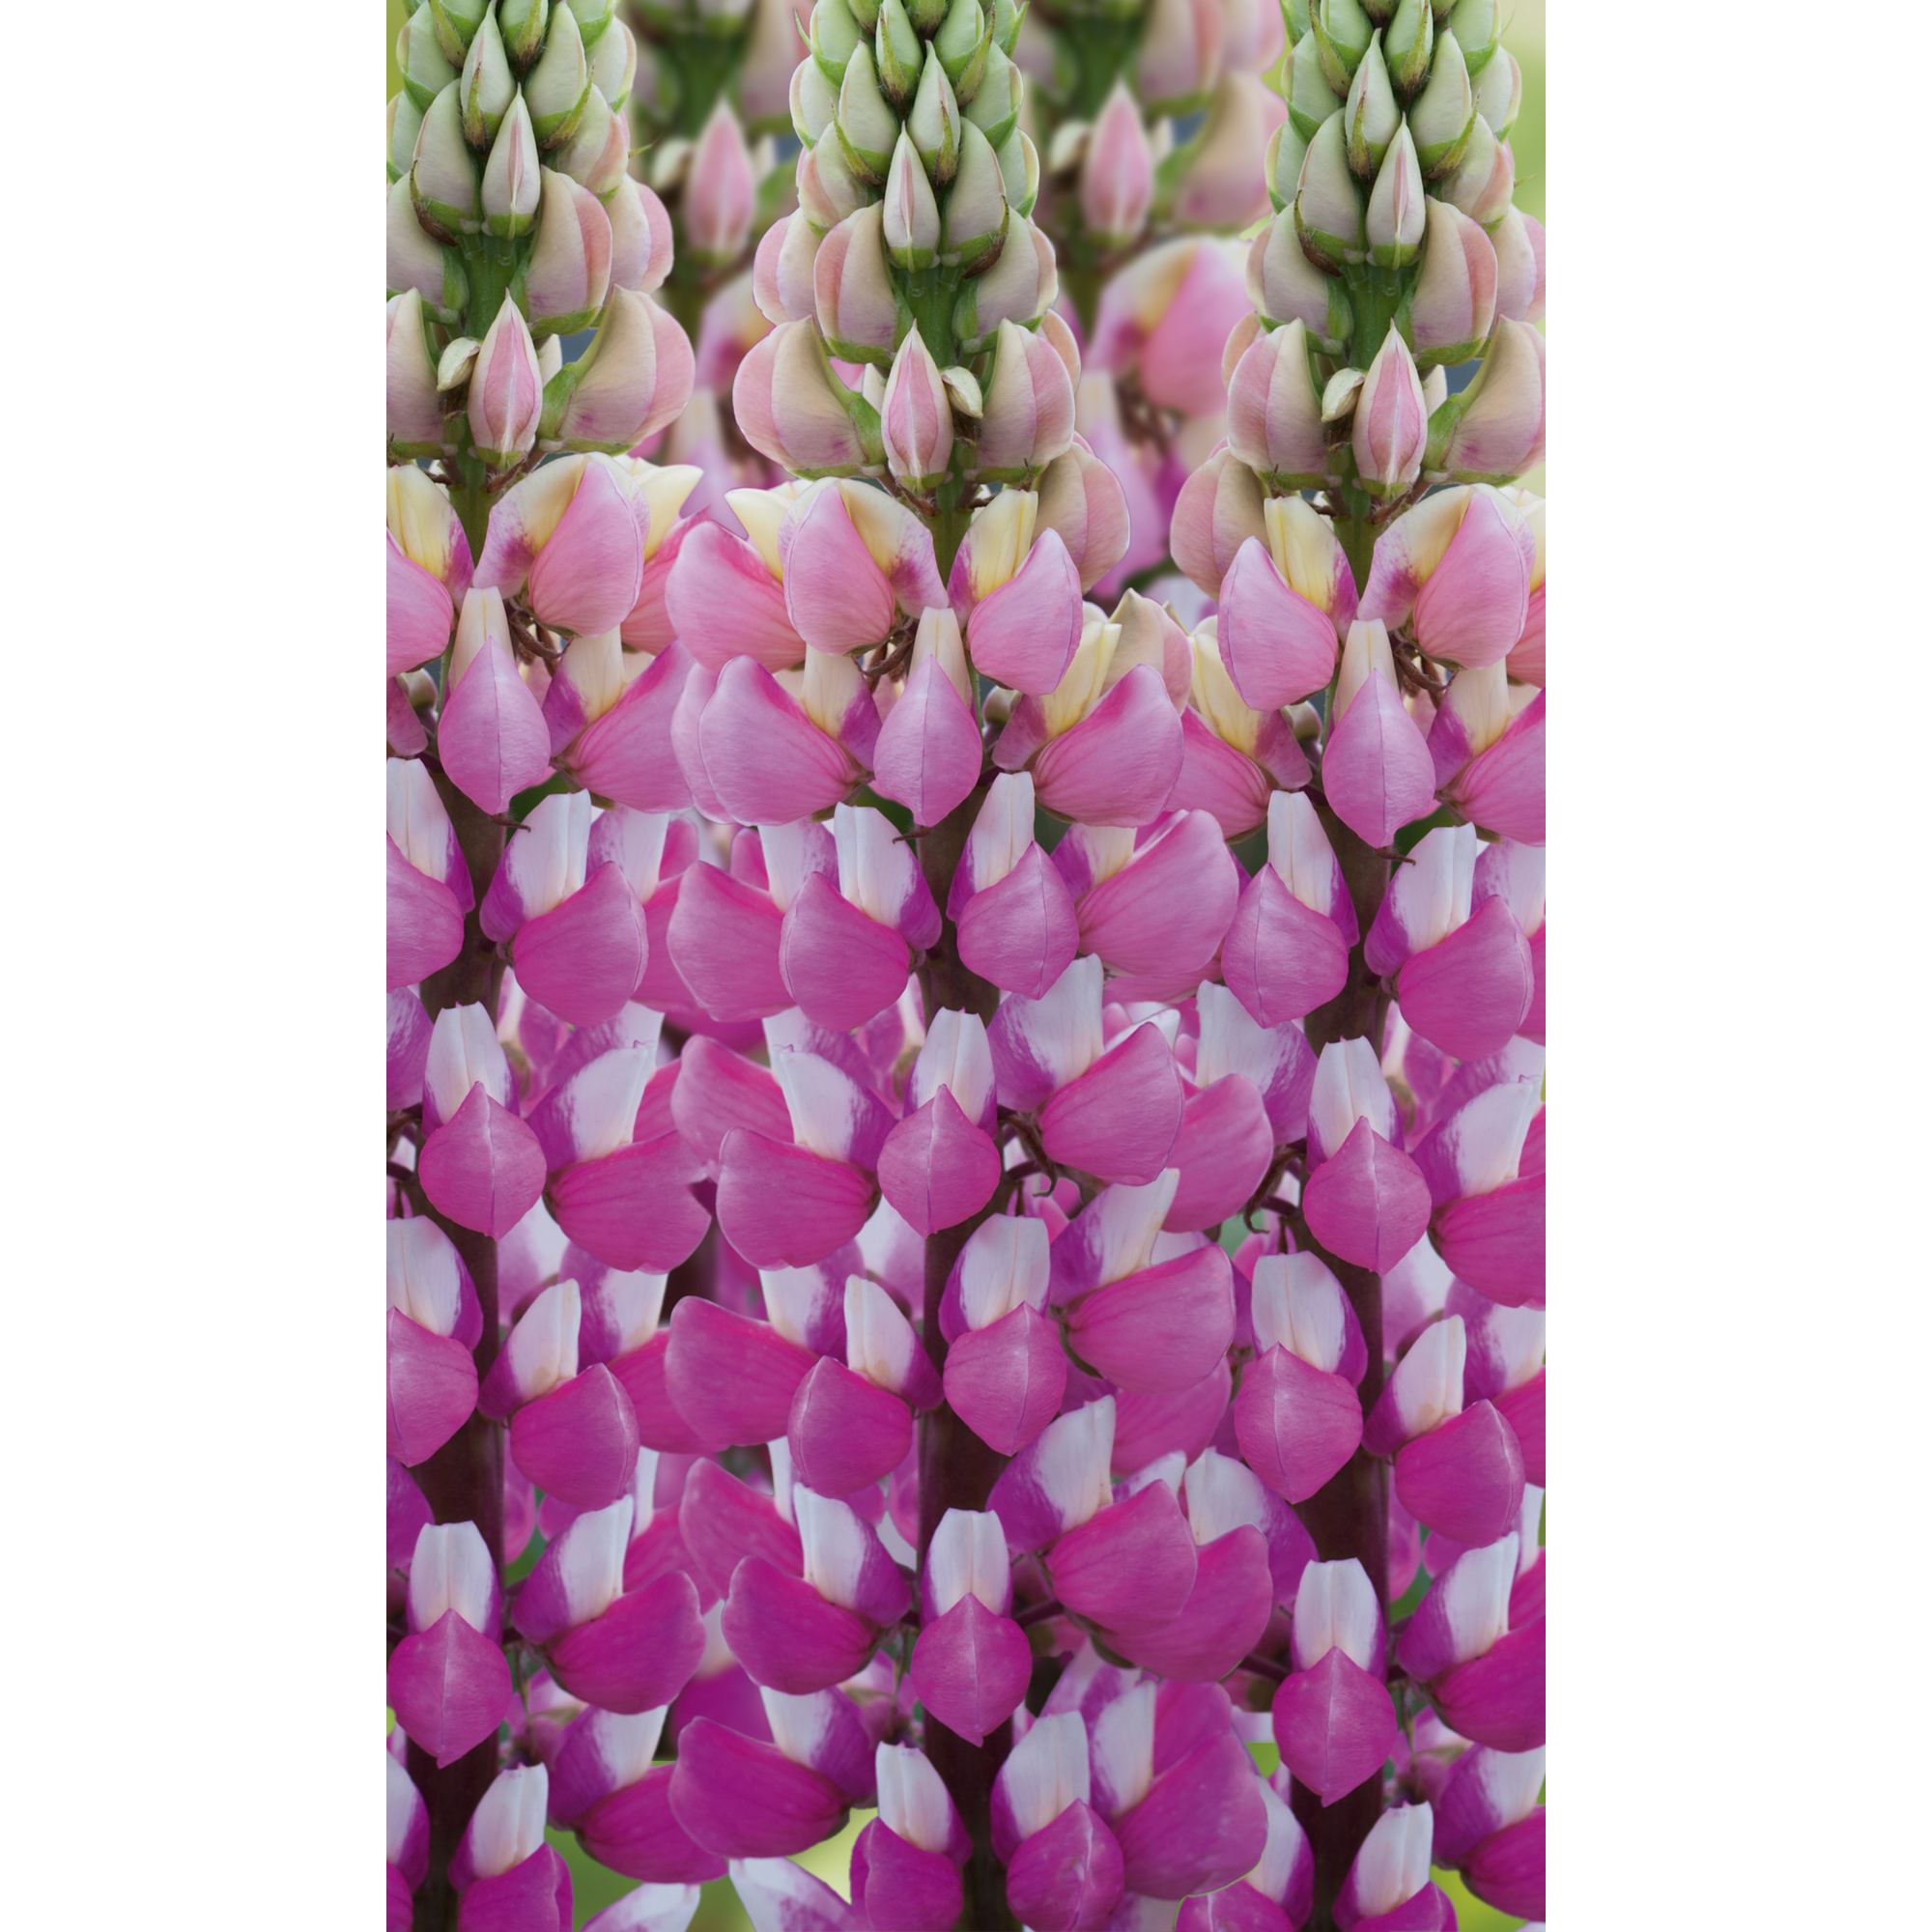 Lupine 'Nanus Gallerry', 9 cm Topf, 3er-Set + product picture